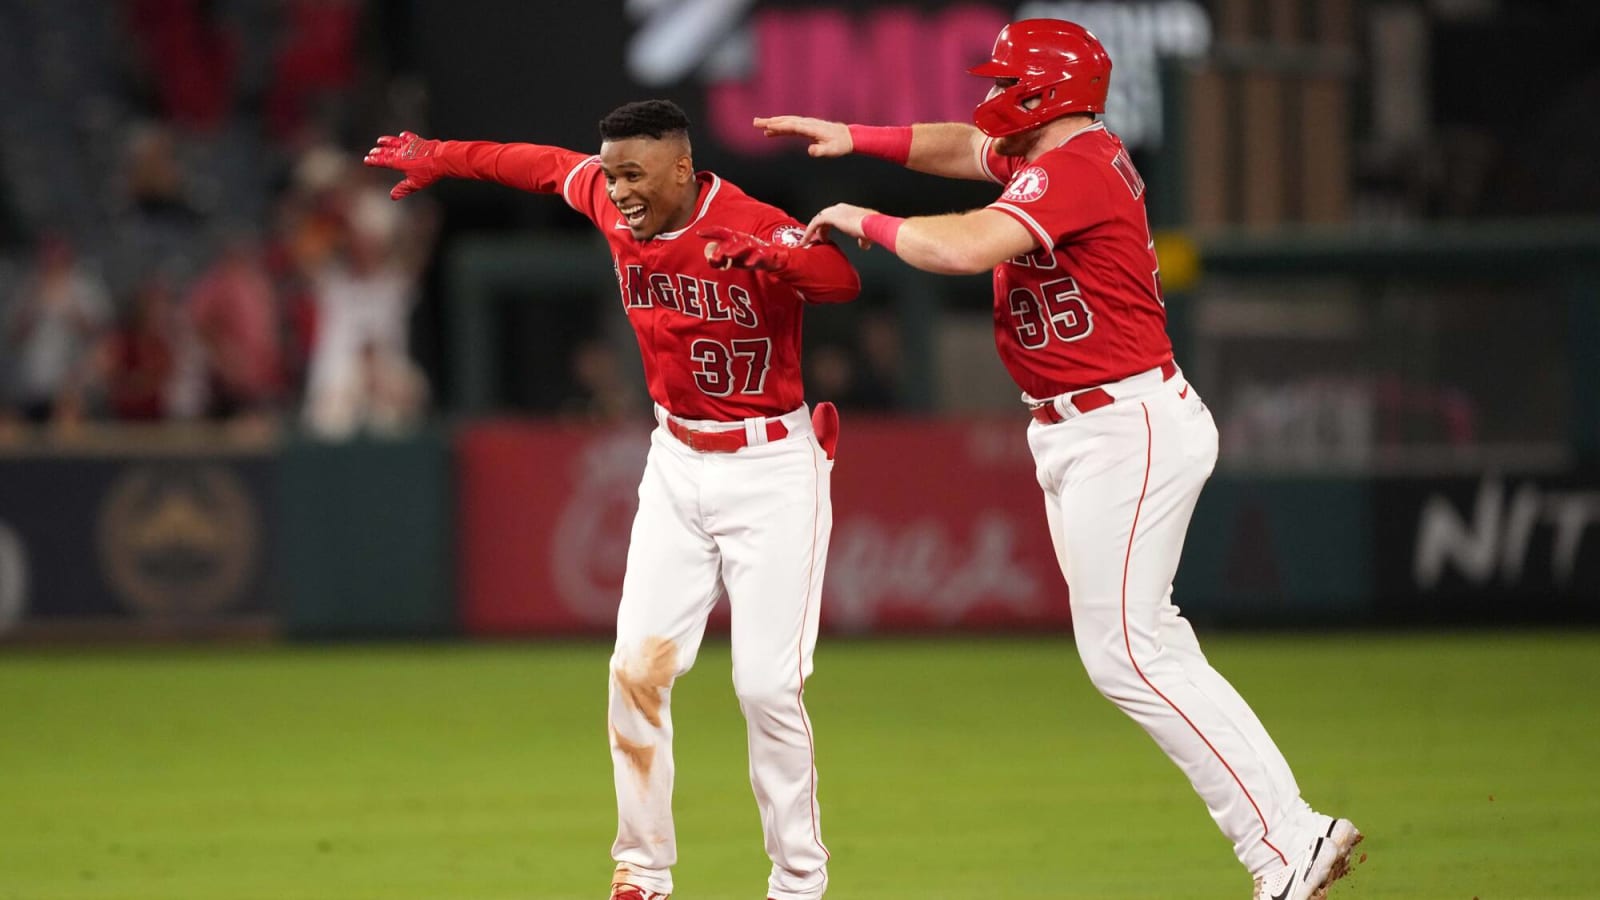  Magneuris Sierra Puts Bunting Practice To Use With Walk-Off Victory